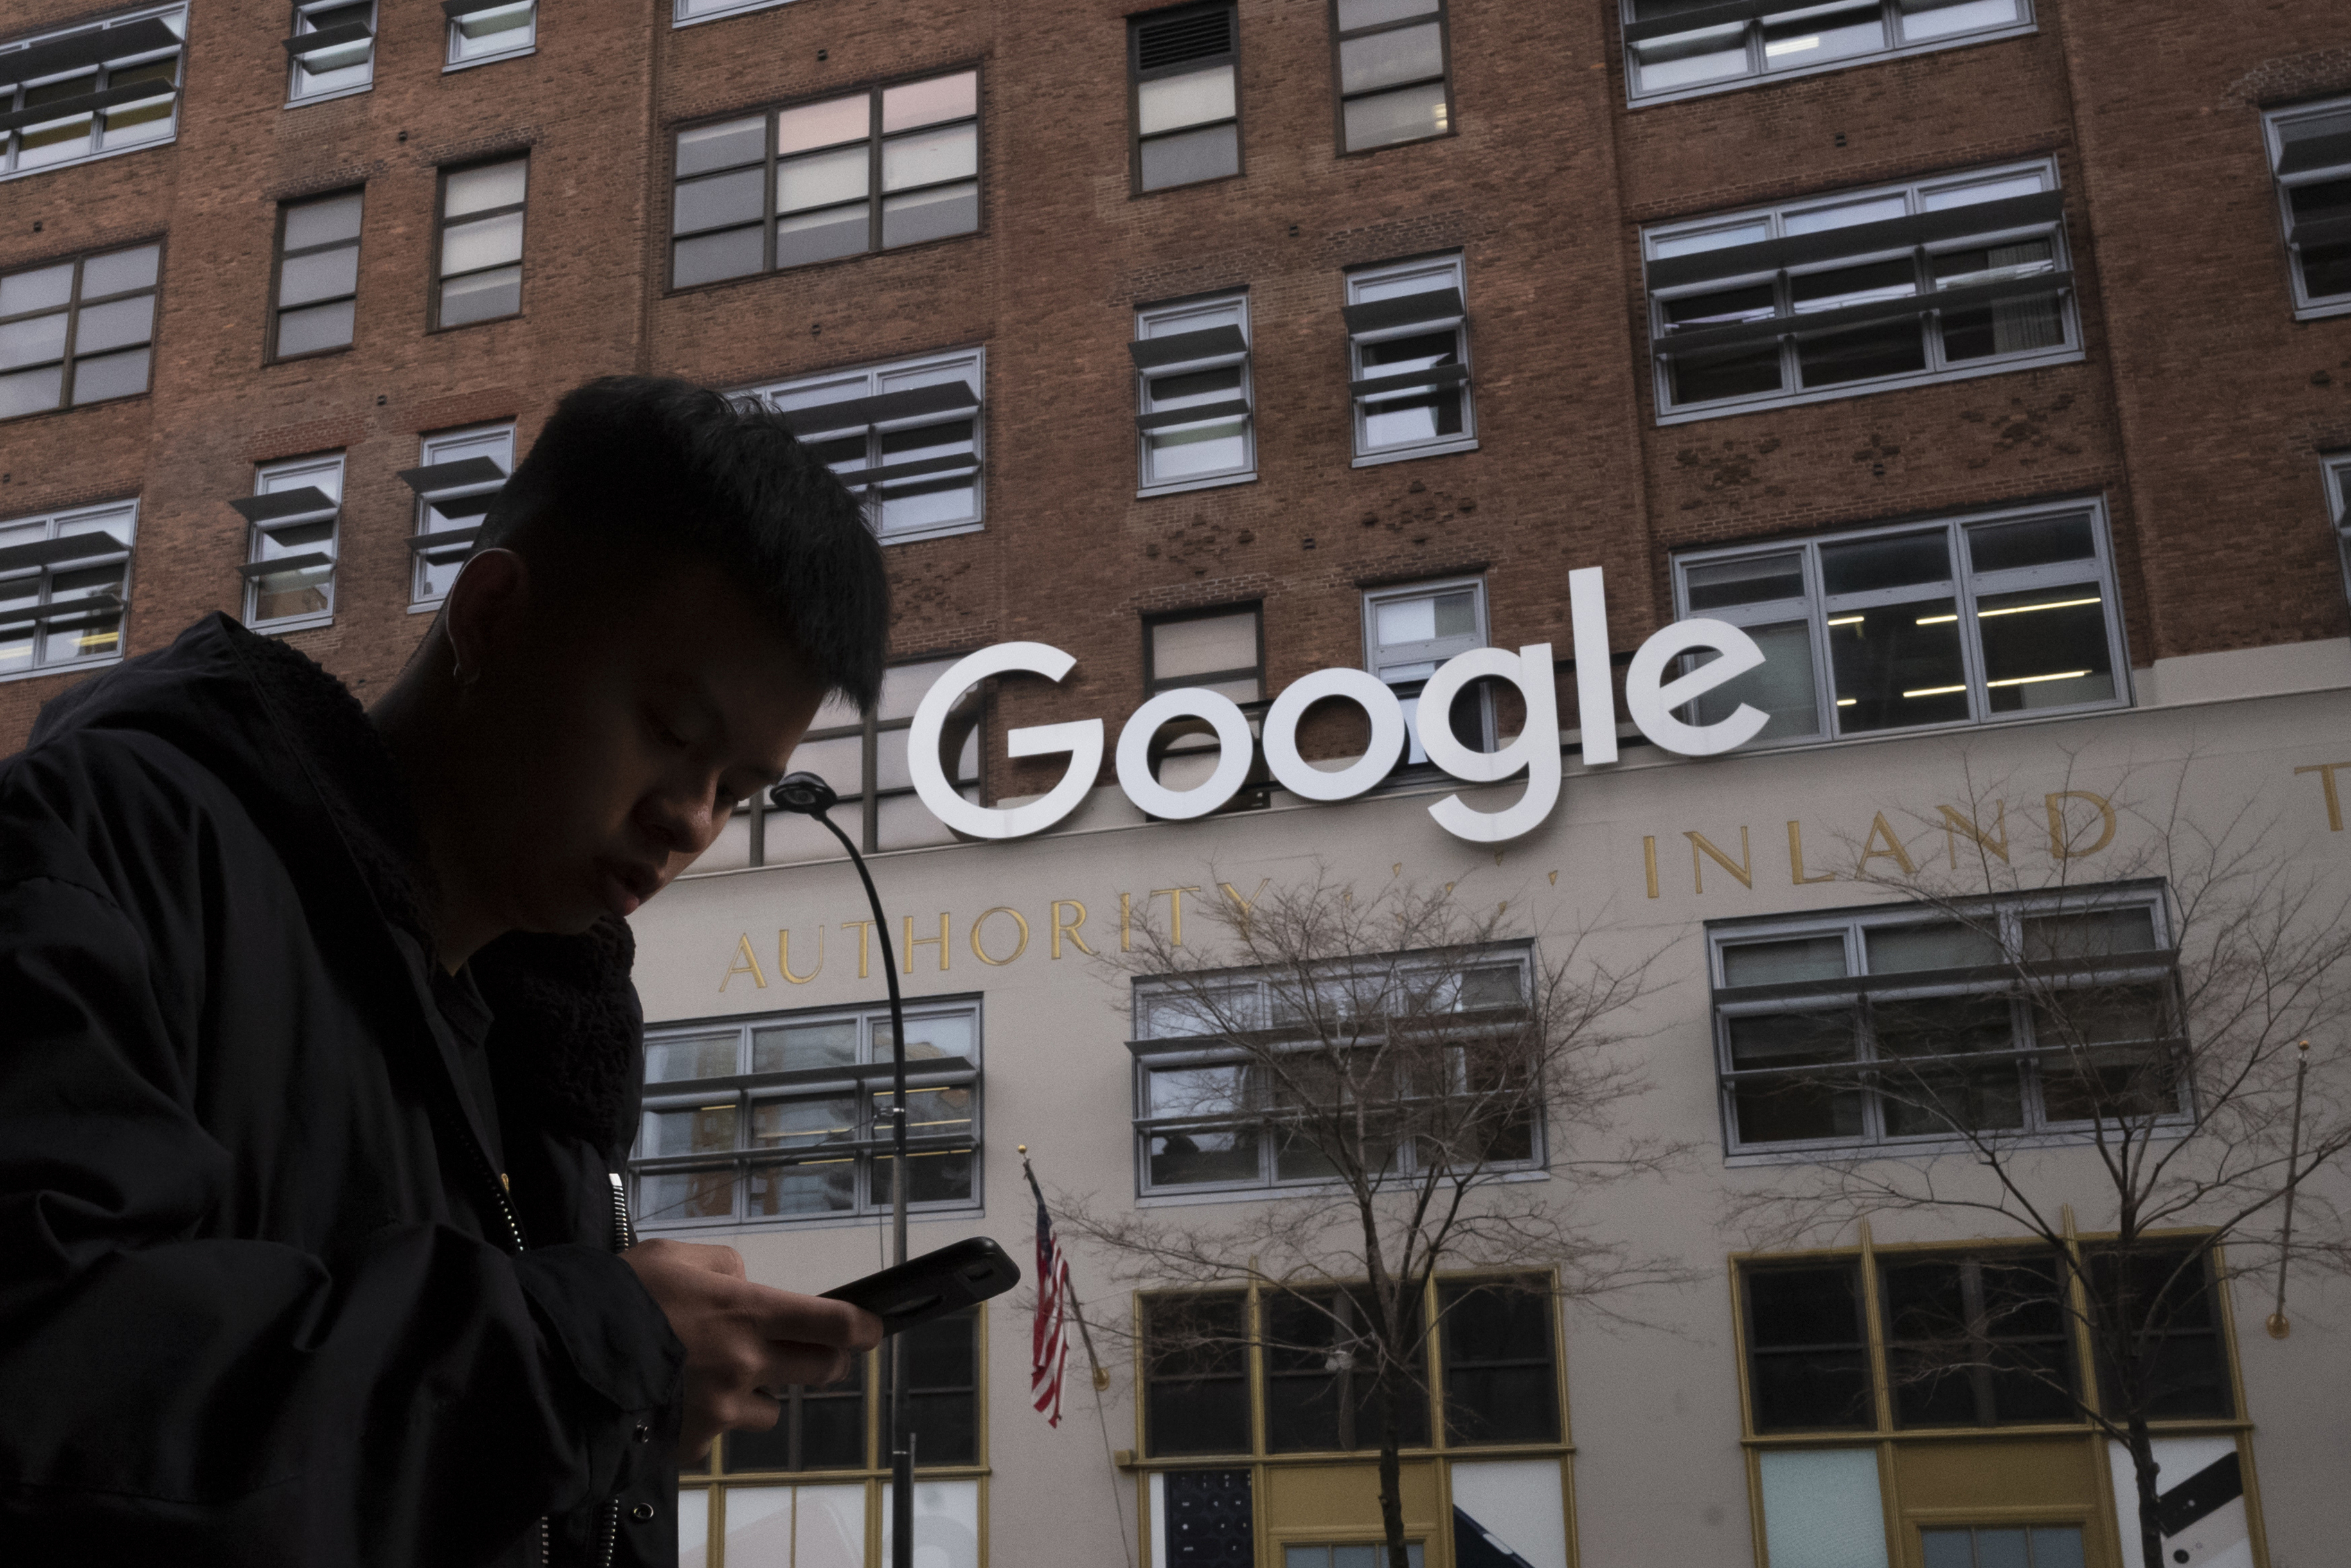 A man using a mobile phone walks past Google offices in New York on Dec. 17, 2018. A Congressional committee hearing began criticizing the spread of hate crimes in the U.S. and social media's role in the spread. (Mark Lennihan—AP)